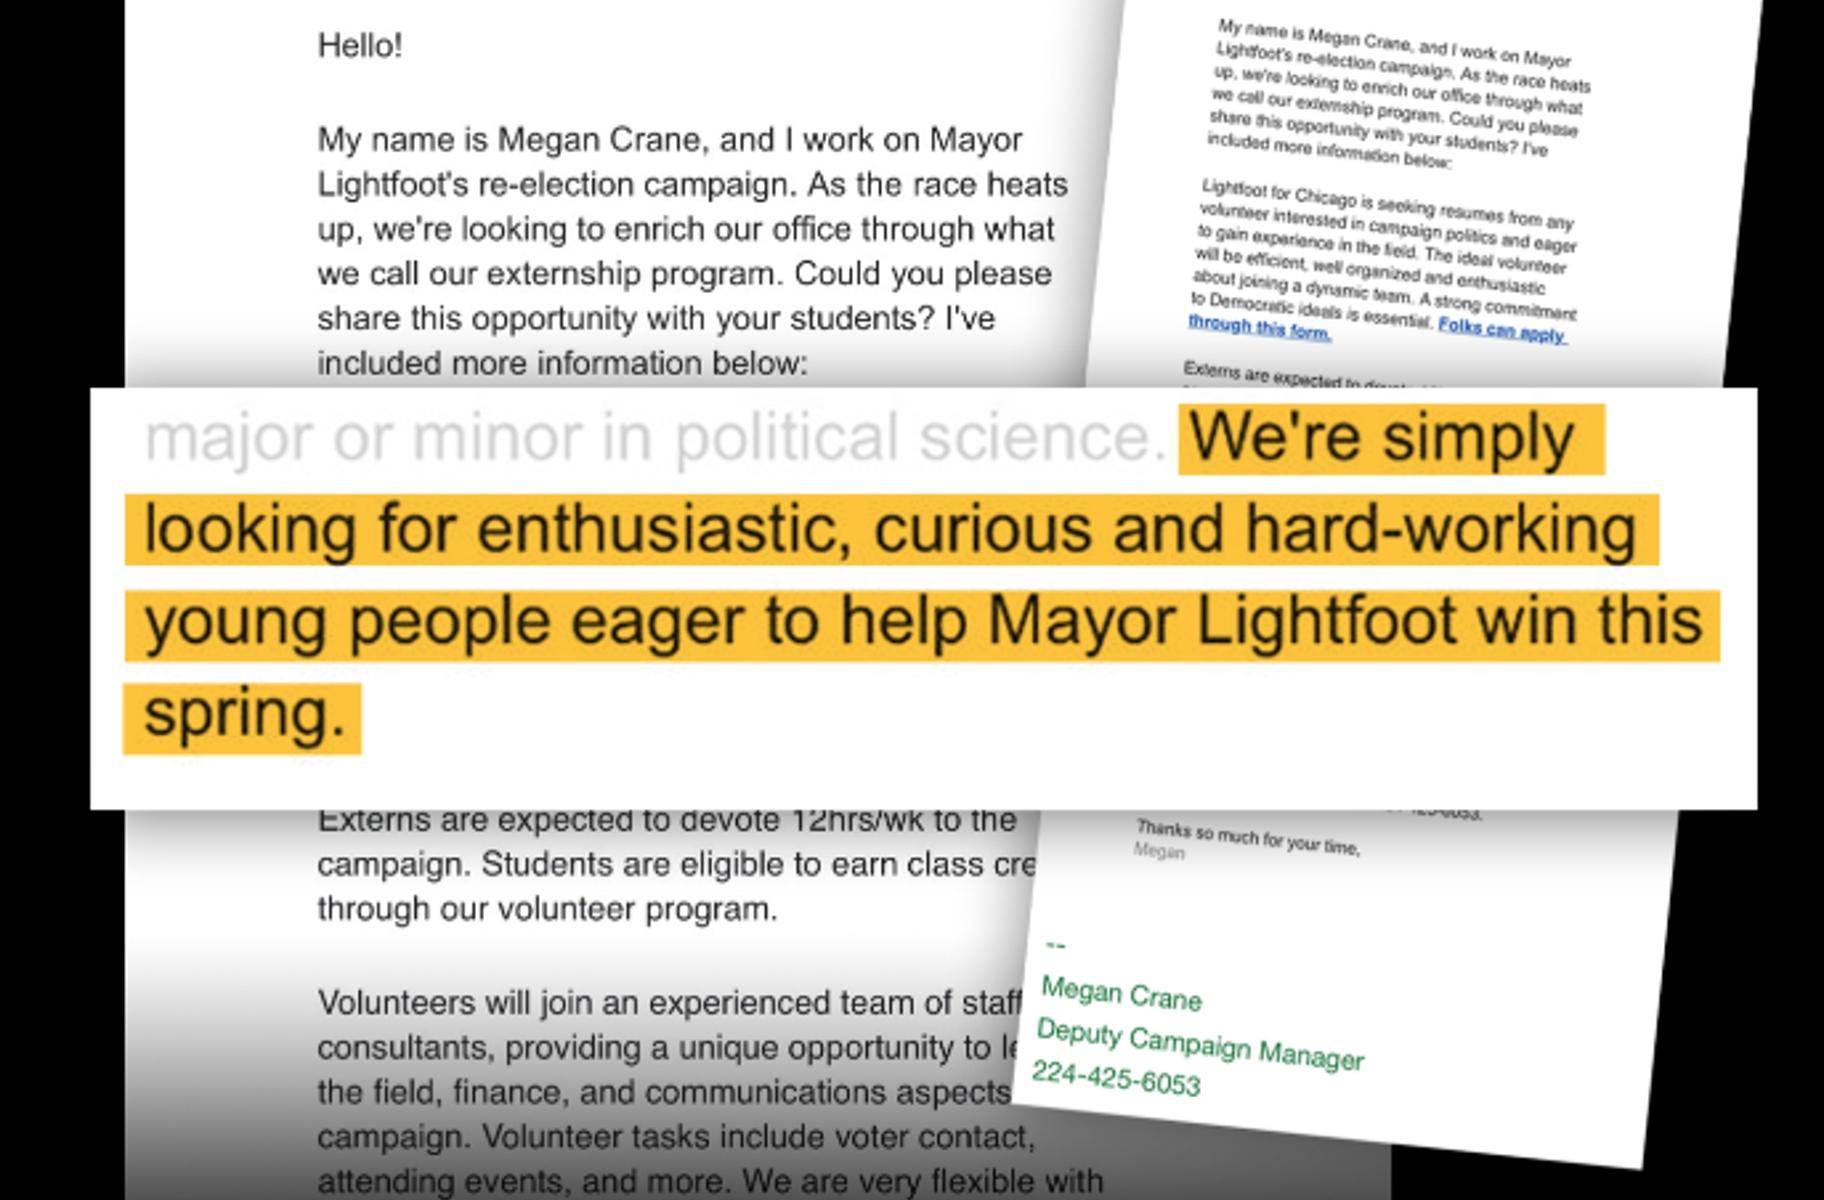 Mayor Lori Lightfoot’s reelection campaign sent an email to Chicago Public Schools teachers Wednesday asking them to encourage their students to volunteer to help Lightfoot win a second term as mayor – and earn class credit.